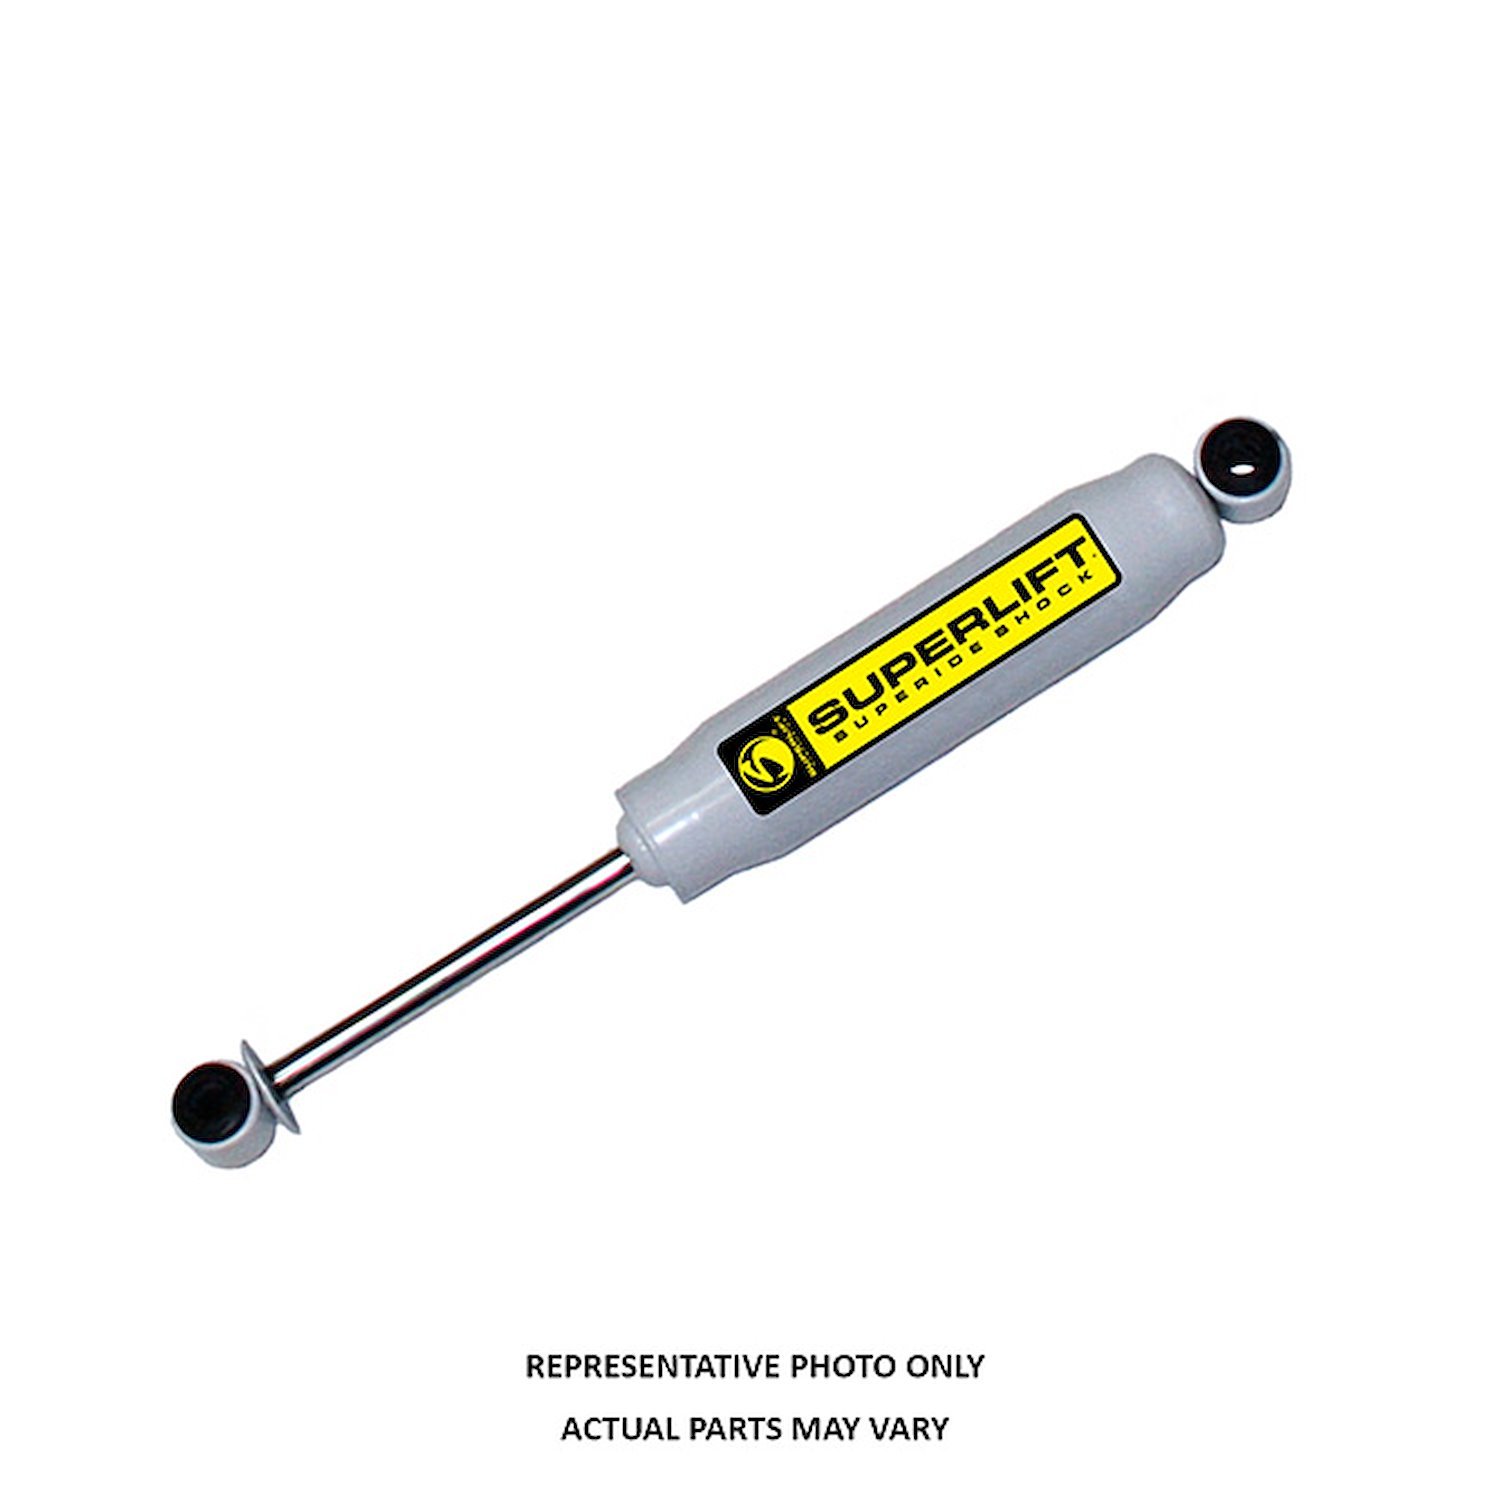 Replacement Steering Stabilizer 1995-2001 GMC Jimmy